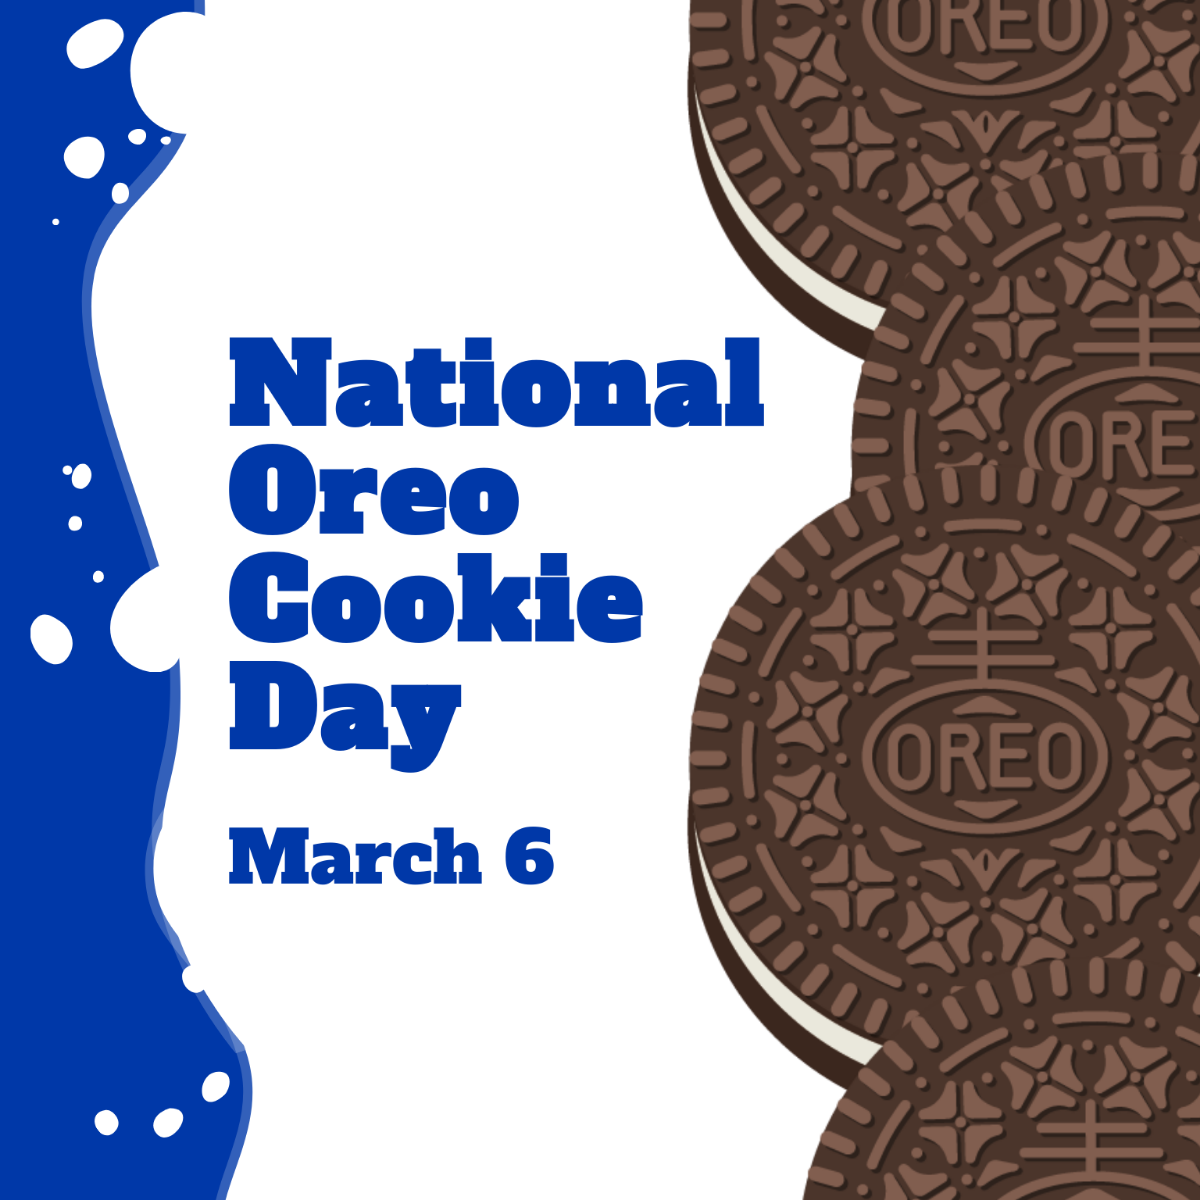 National Oreo Cookie Day Flyer Vector